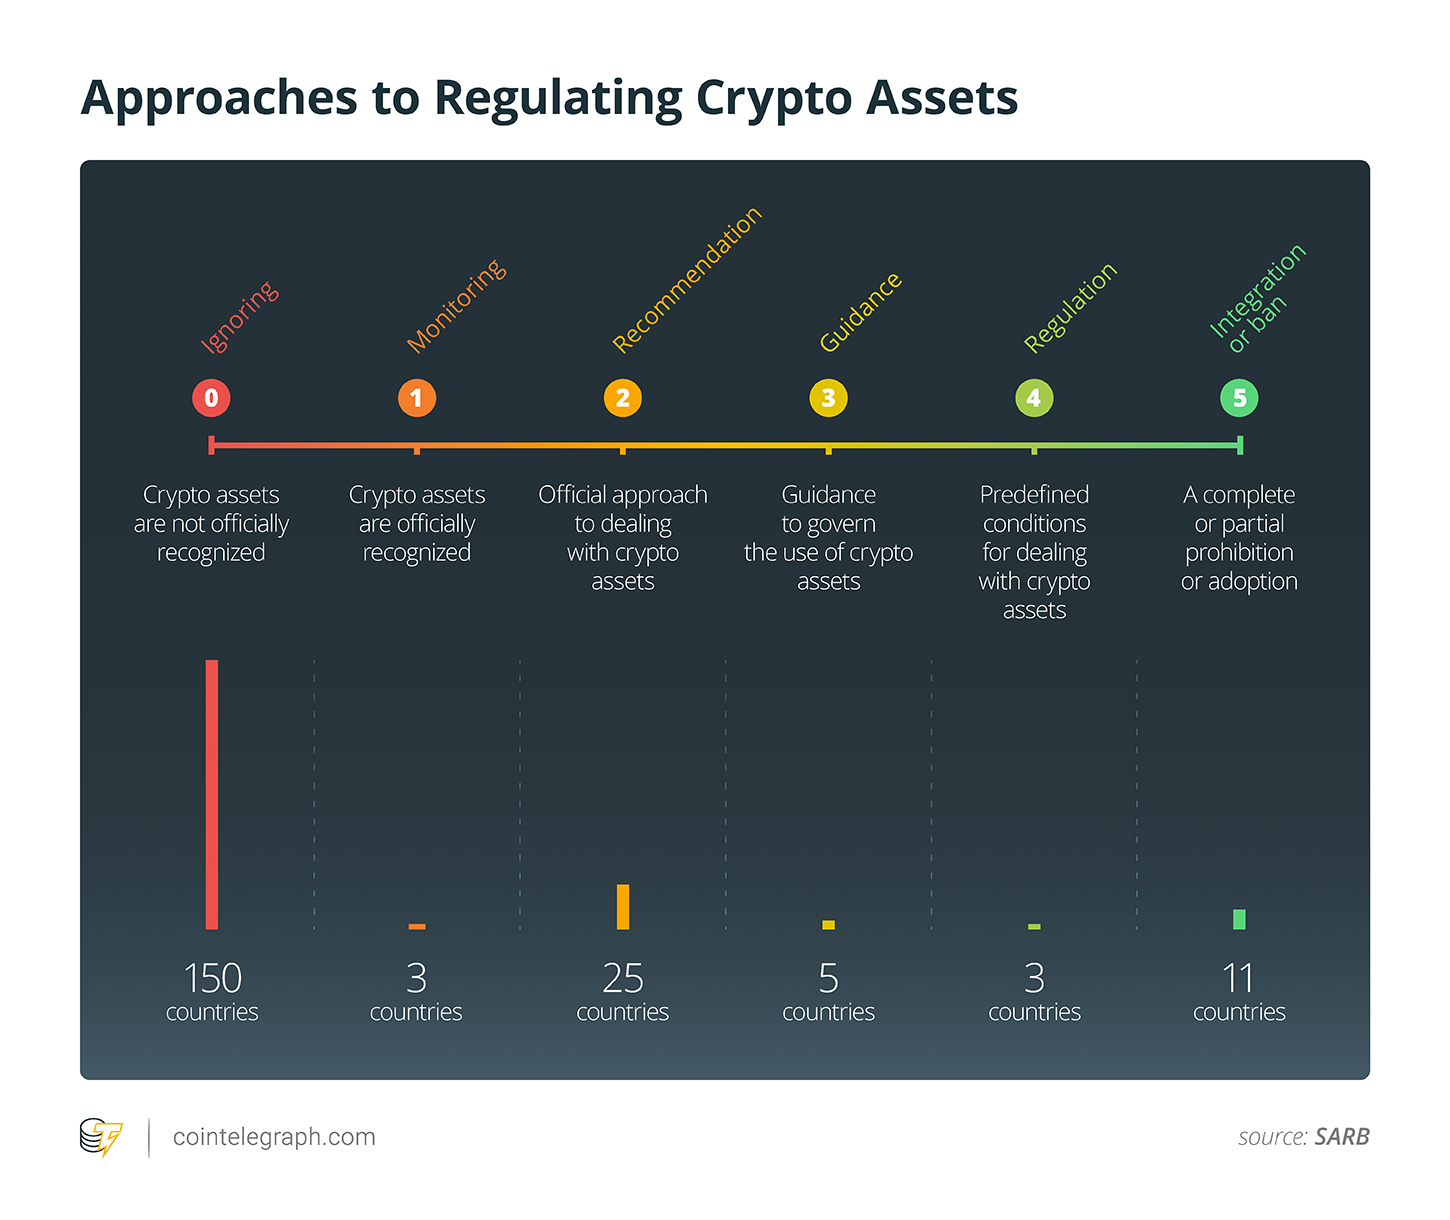 Approaches to Regulating Crypto Assets